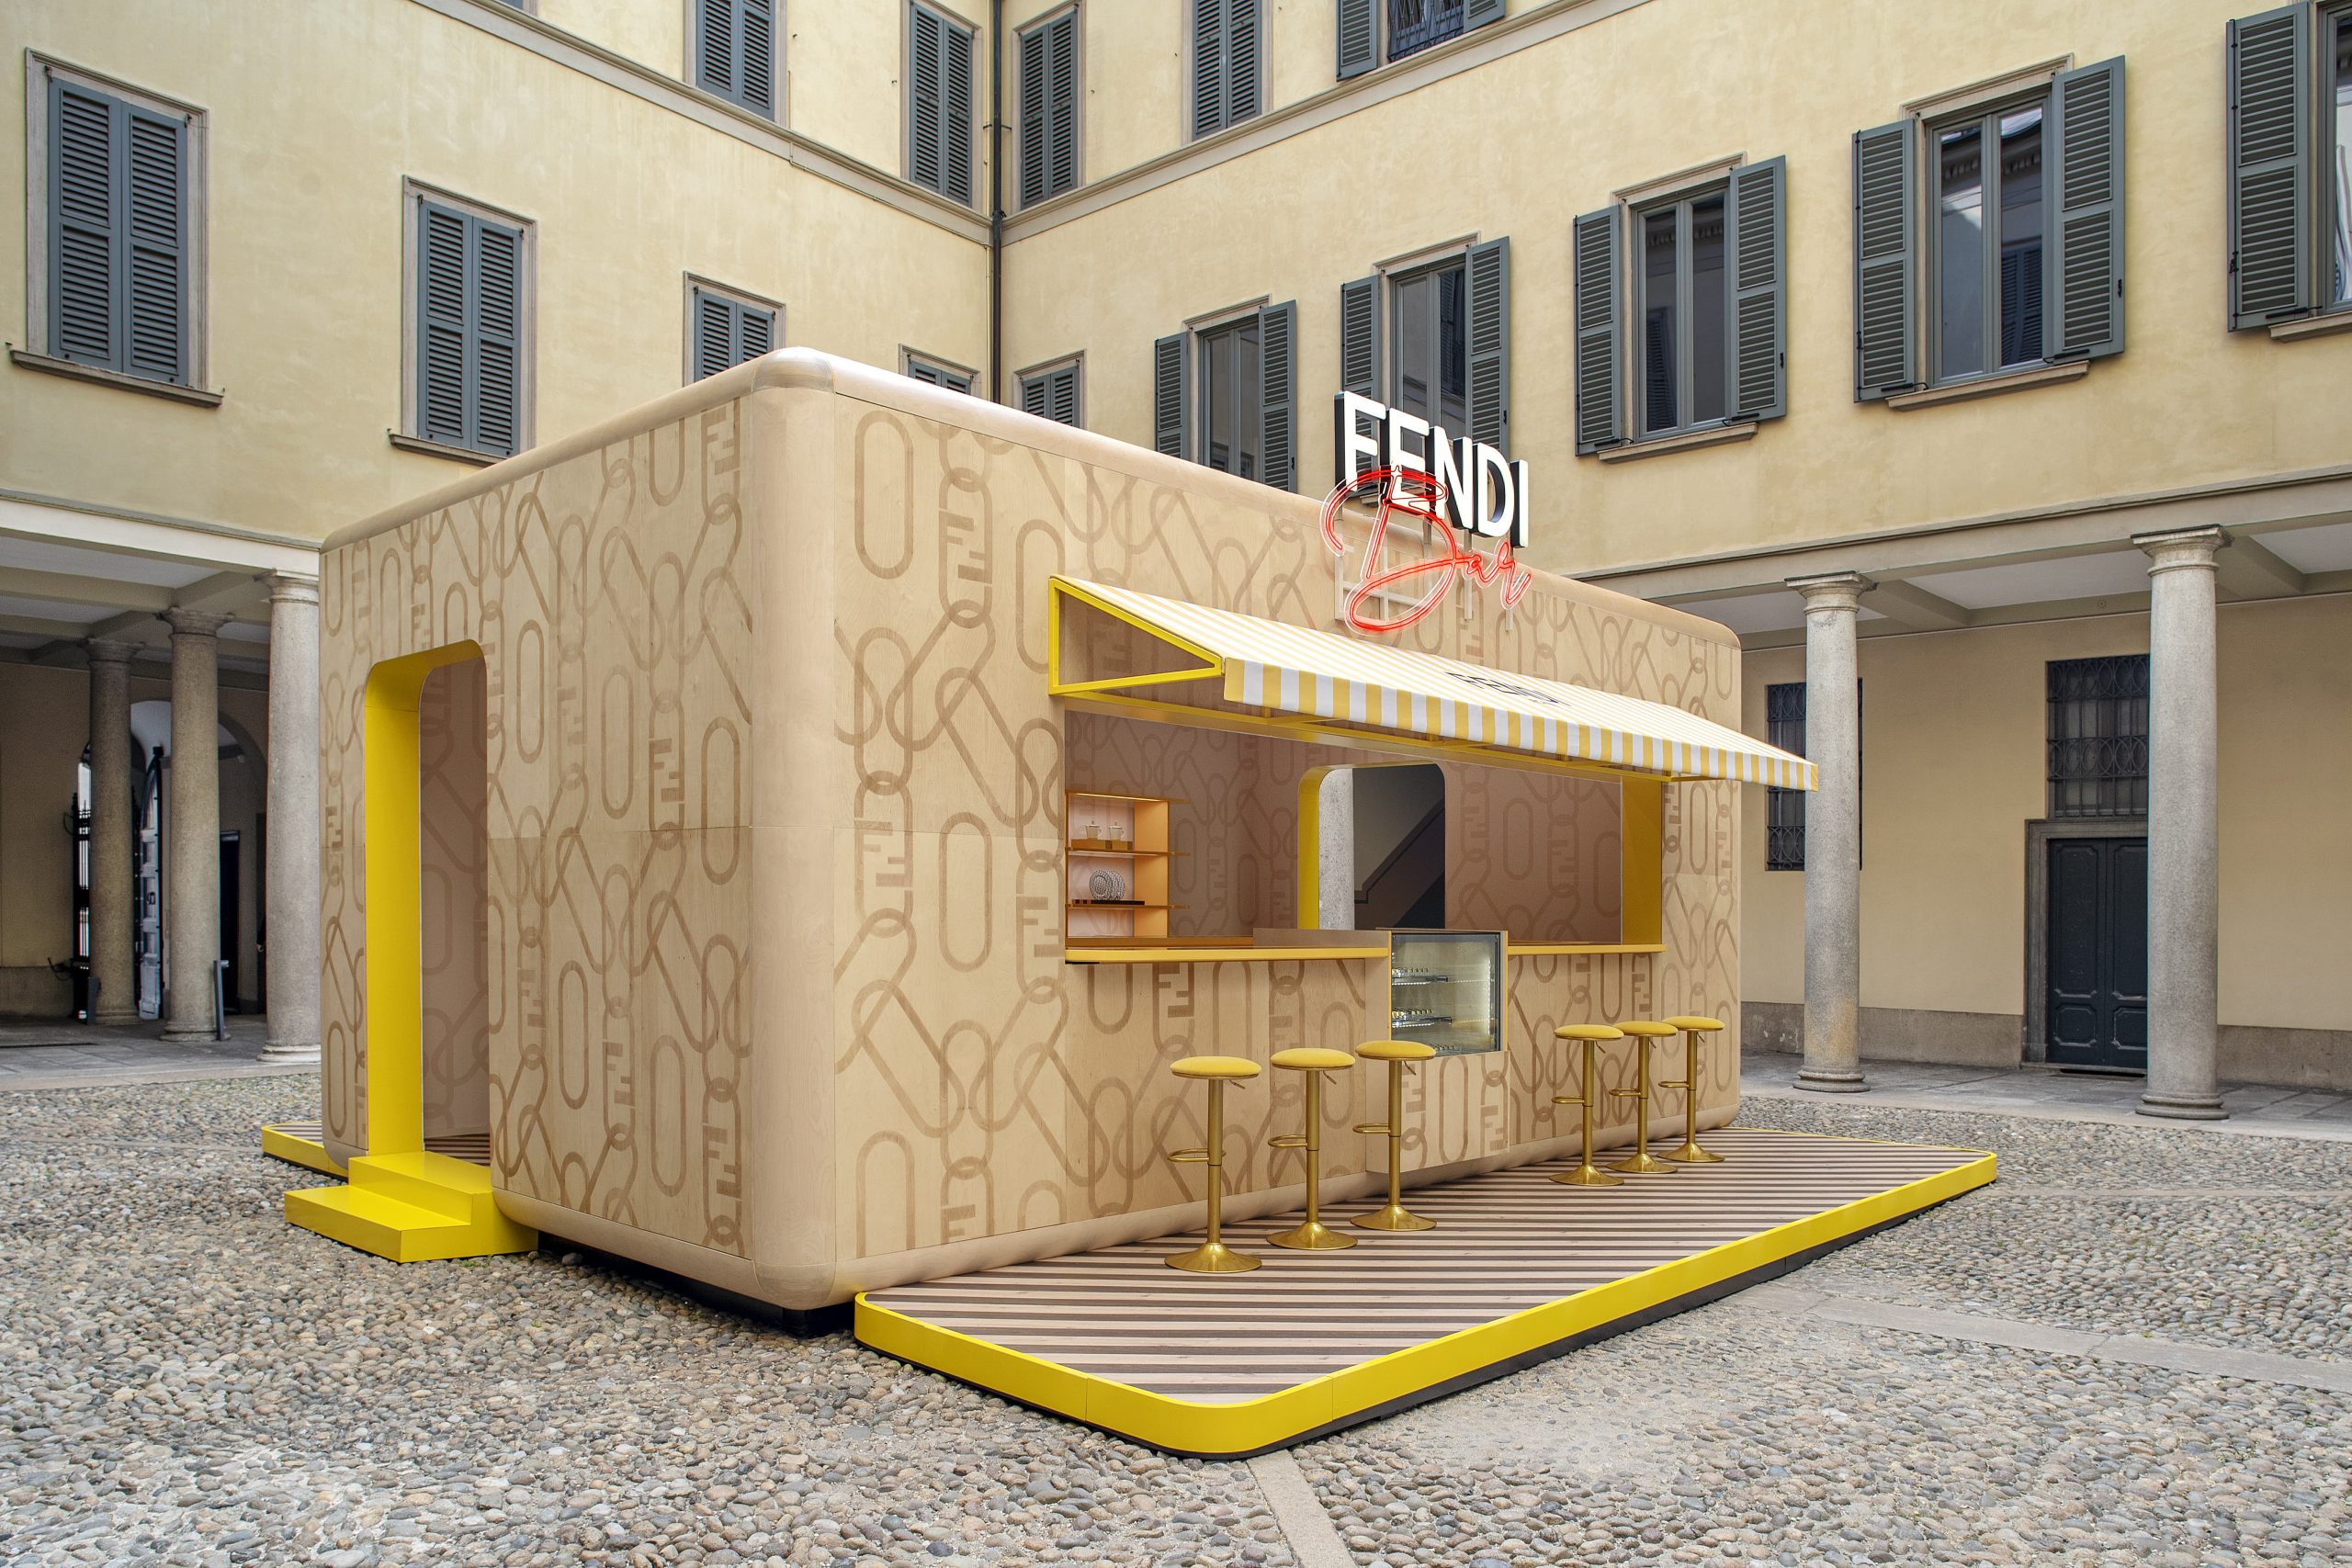 FENDI casa inaugurates its first flagship store in the heart of milan